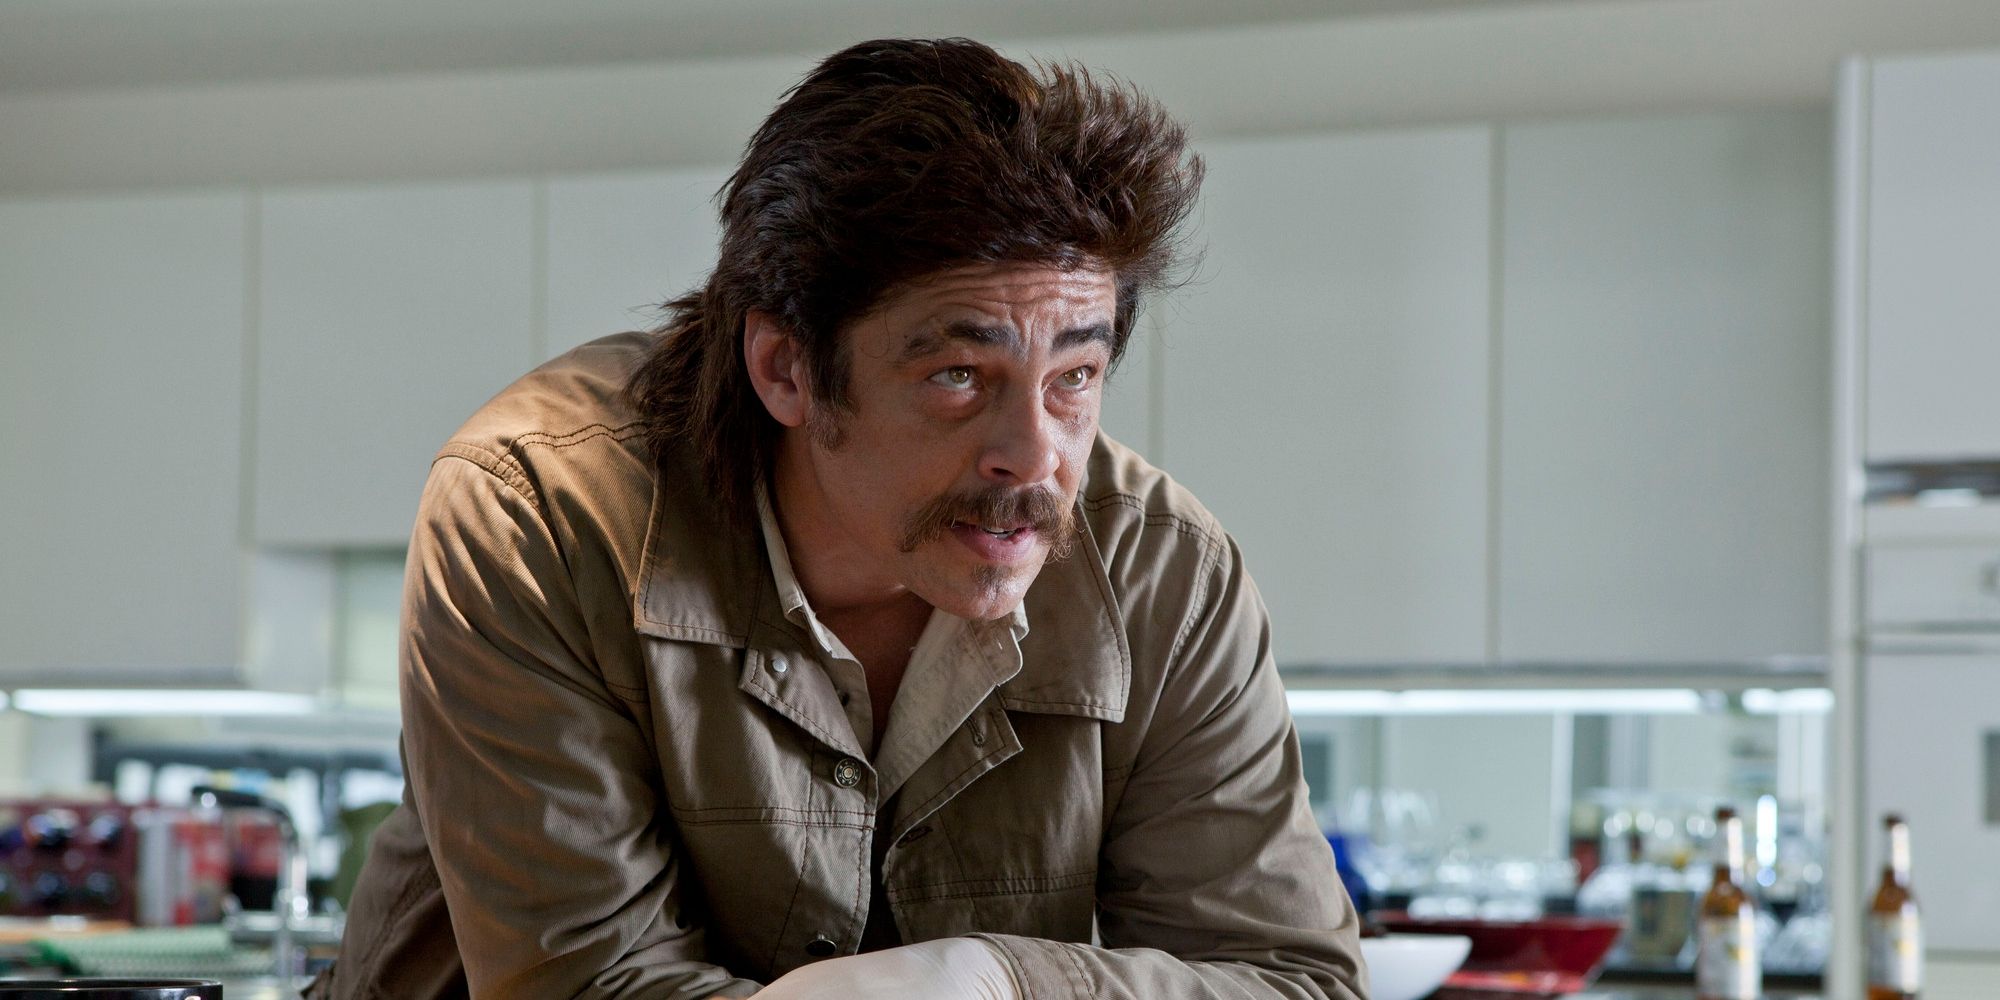 Benicio Del Toro as Lado leaning over a counter and looking ahead in Savages